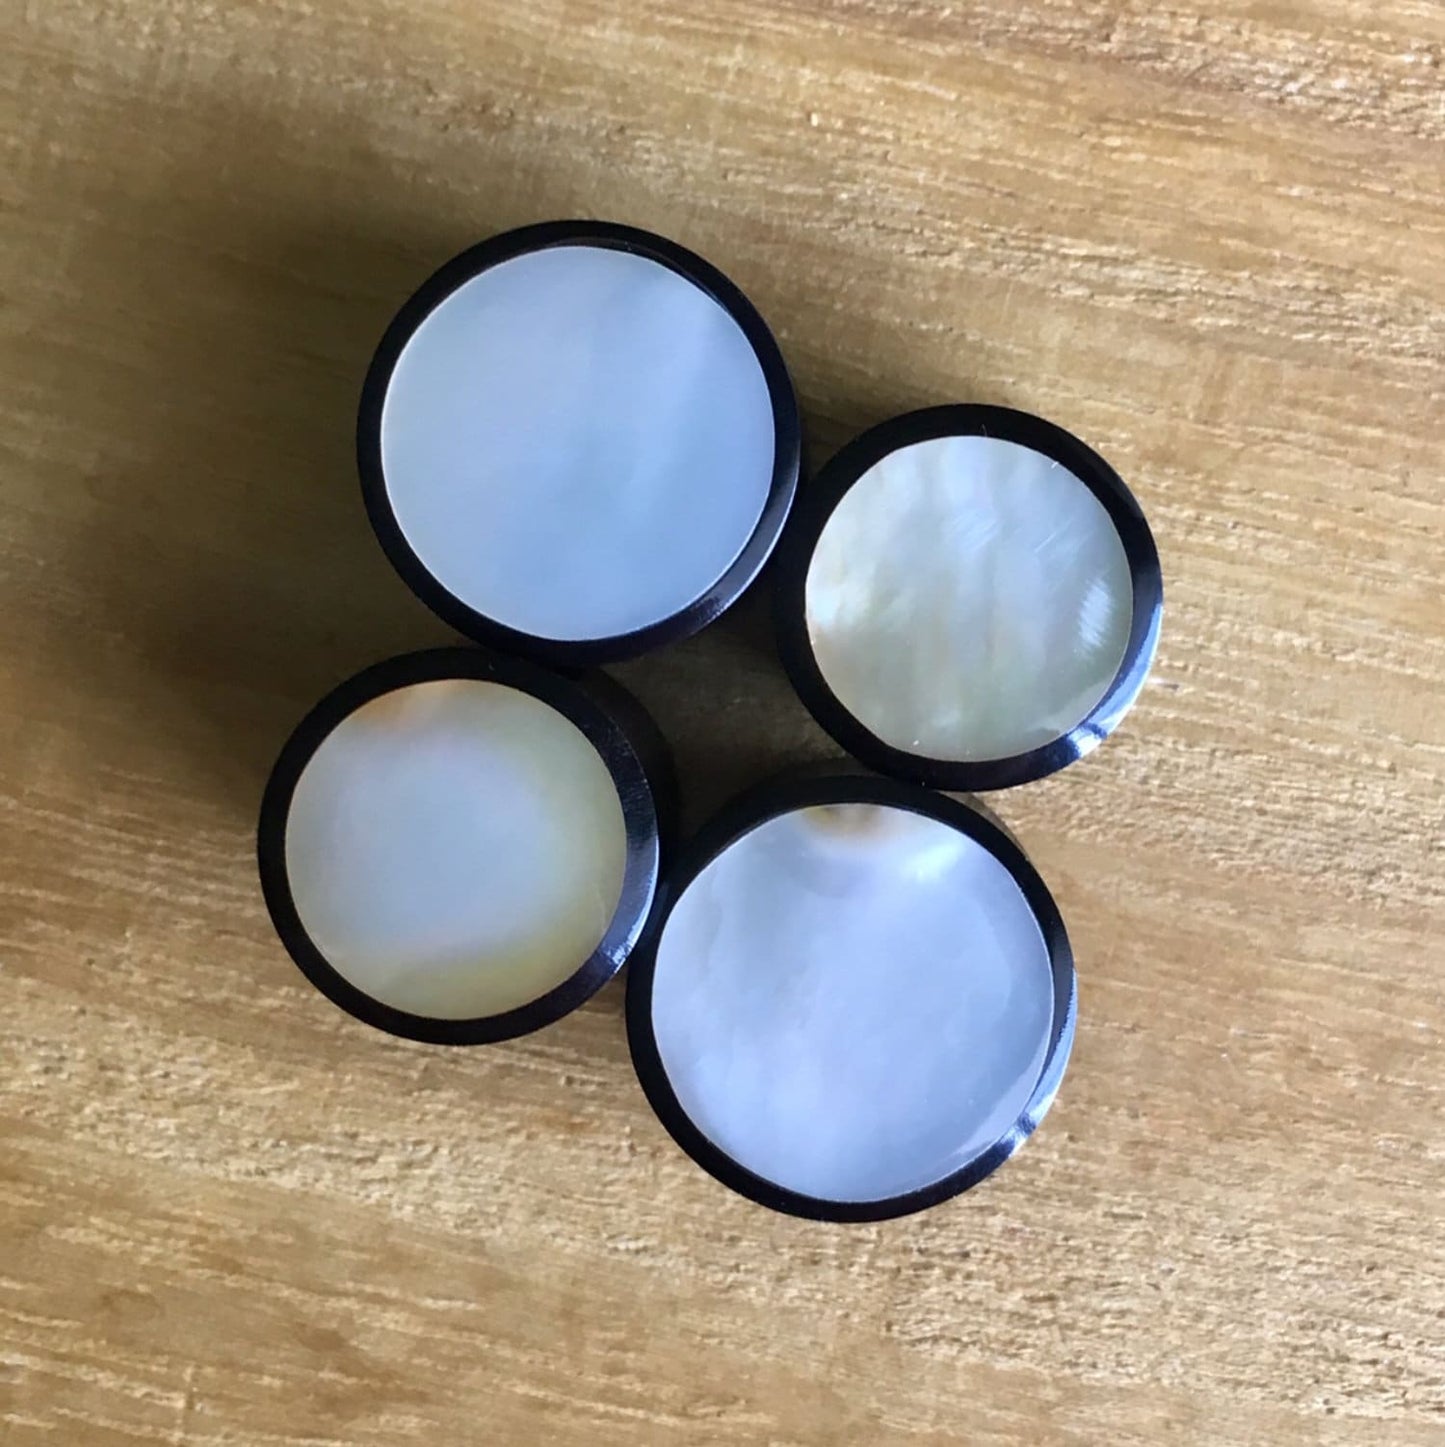 PAIR of Unique Organic Horn with Mother of Pearl Inlay Plugs - Gauges 4g (5mm) up to 5/8" (16mm) available!